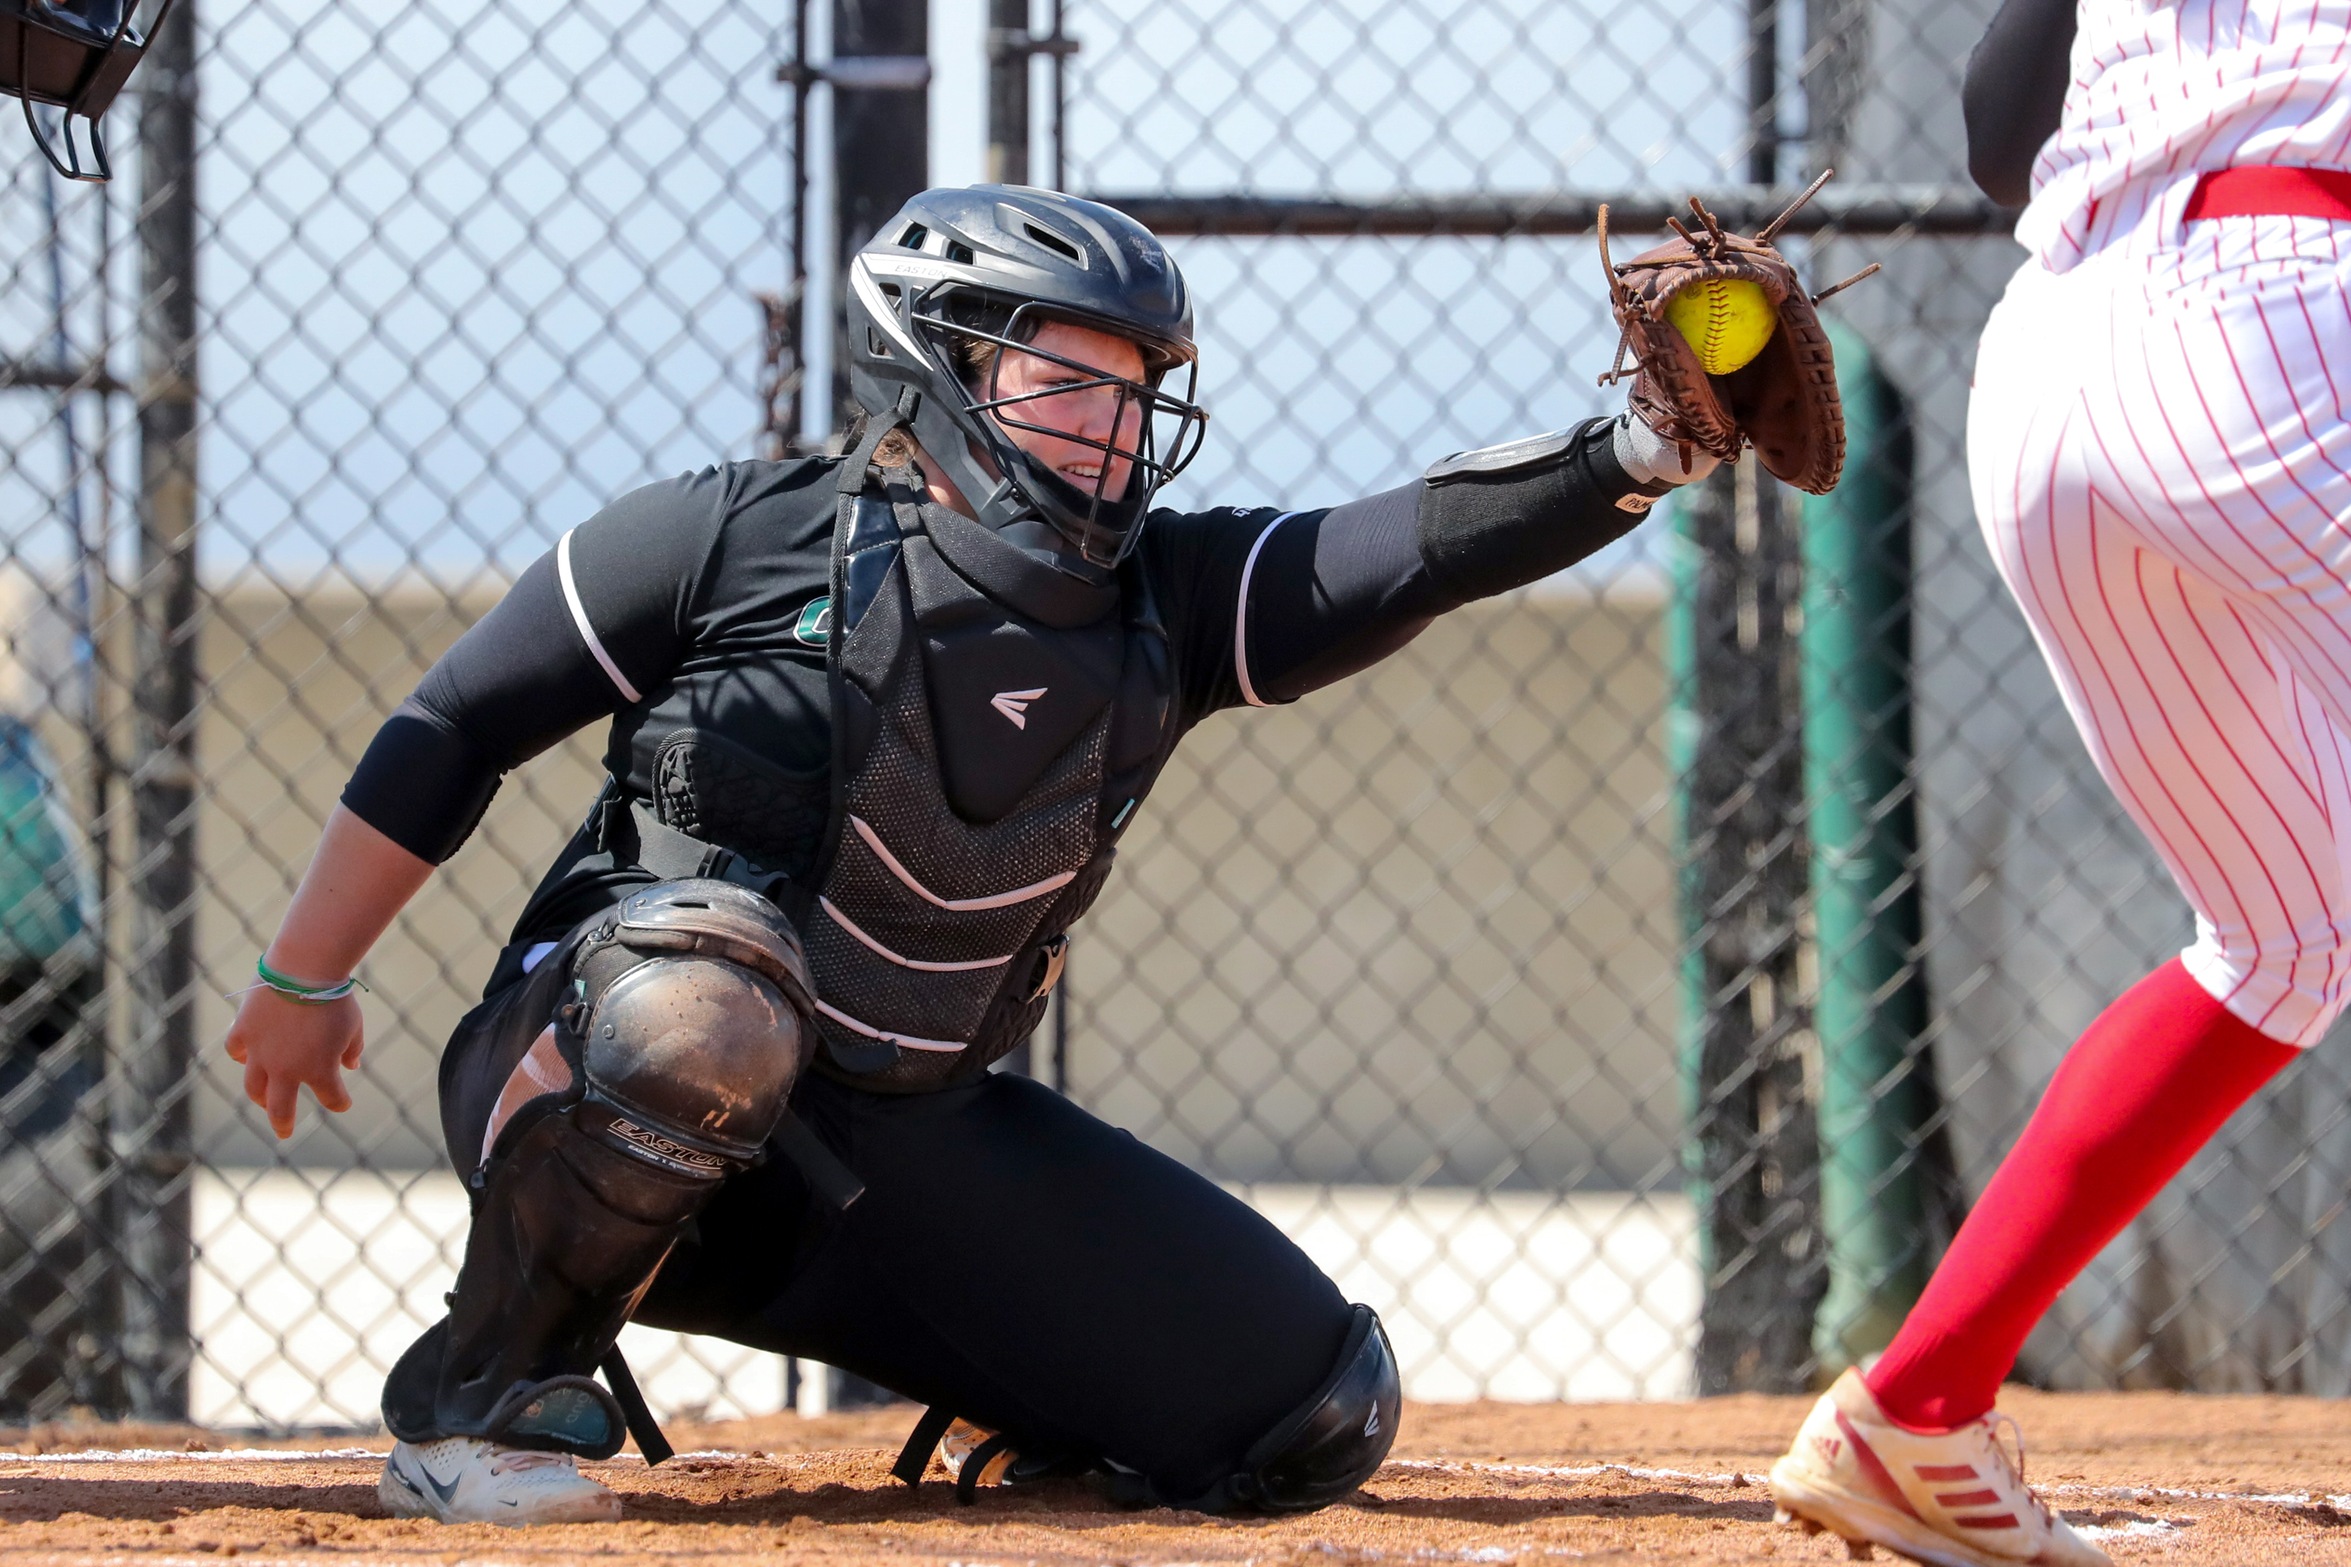 Cleveland State Softball Set for #HLSB Showdown Series with Oakland